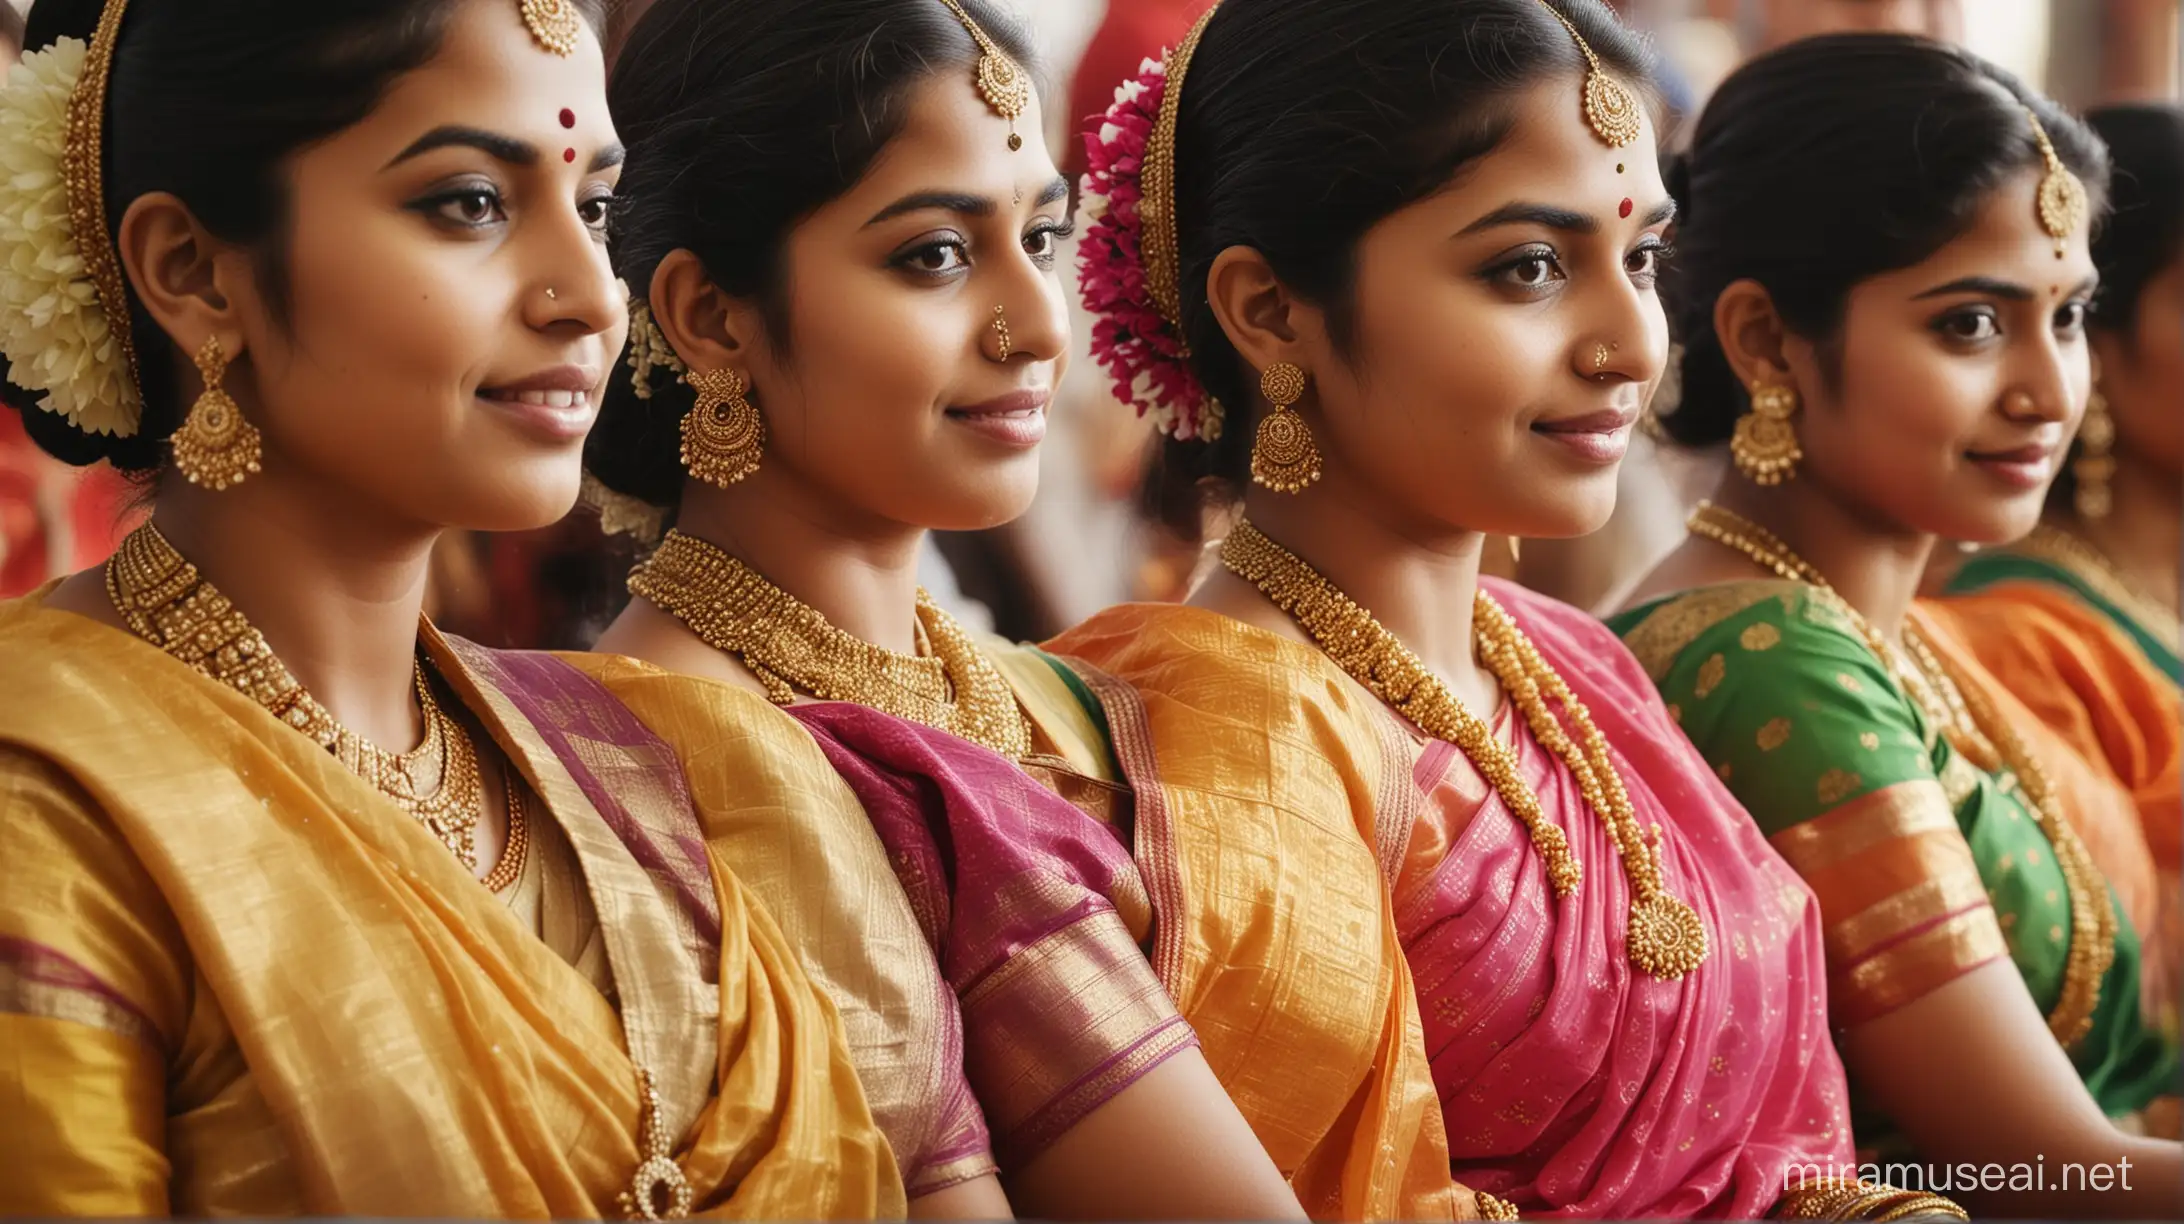 close up shot of south indian womens sitting in a event, wearing colorful sarees and jewellery, shot on canon dslr, 50mm lense, hyper realistic, hyper detailed